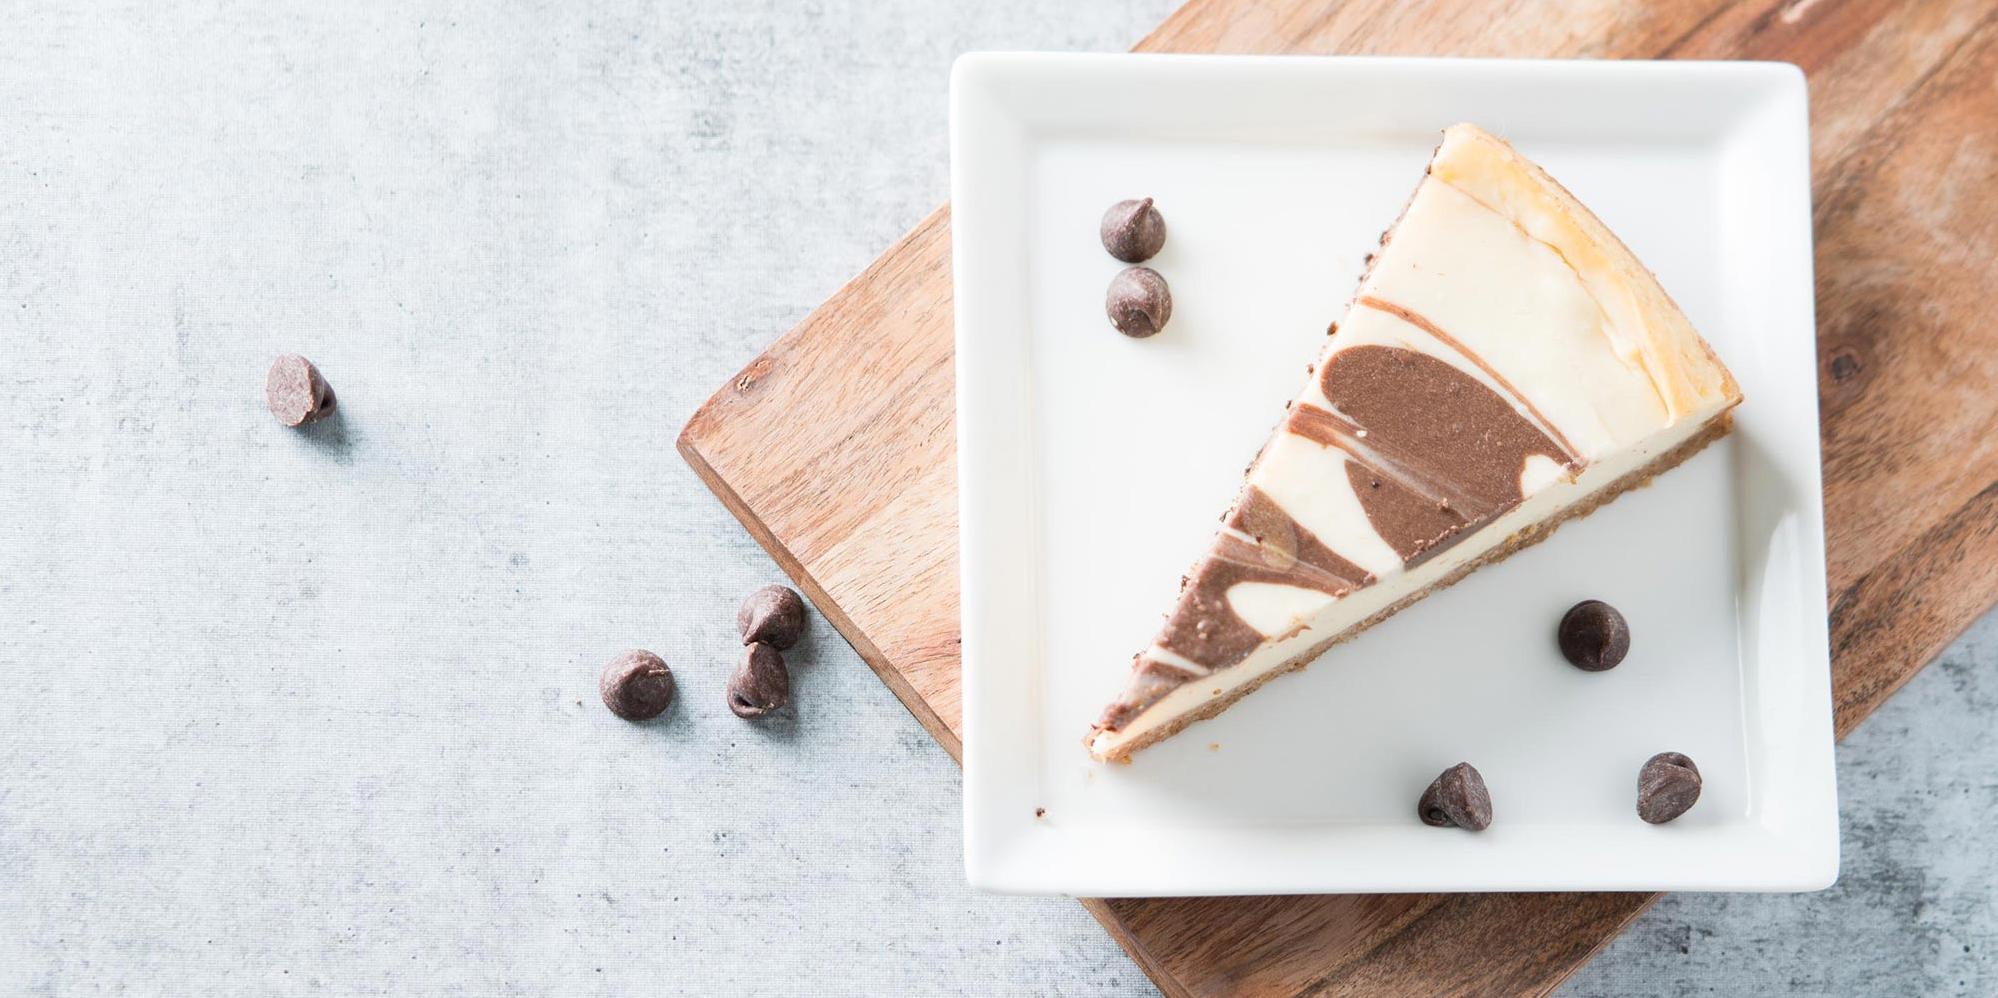  Satisfy your sweet tooth cravings with a slice of our Mocha Swirl Cheesecake